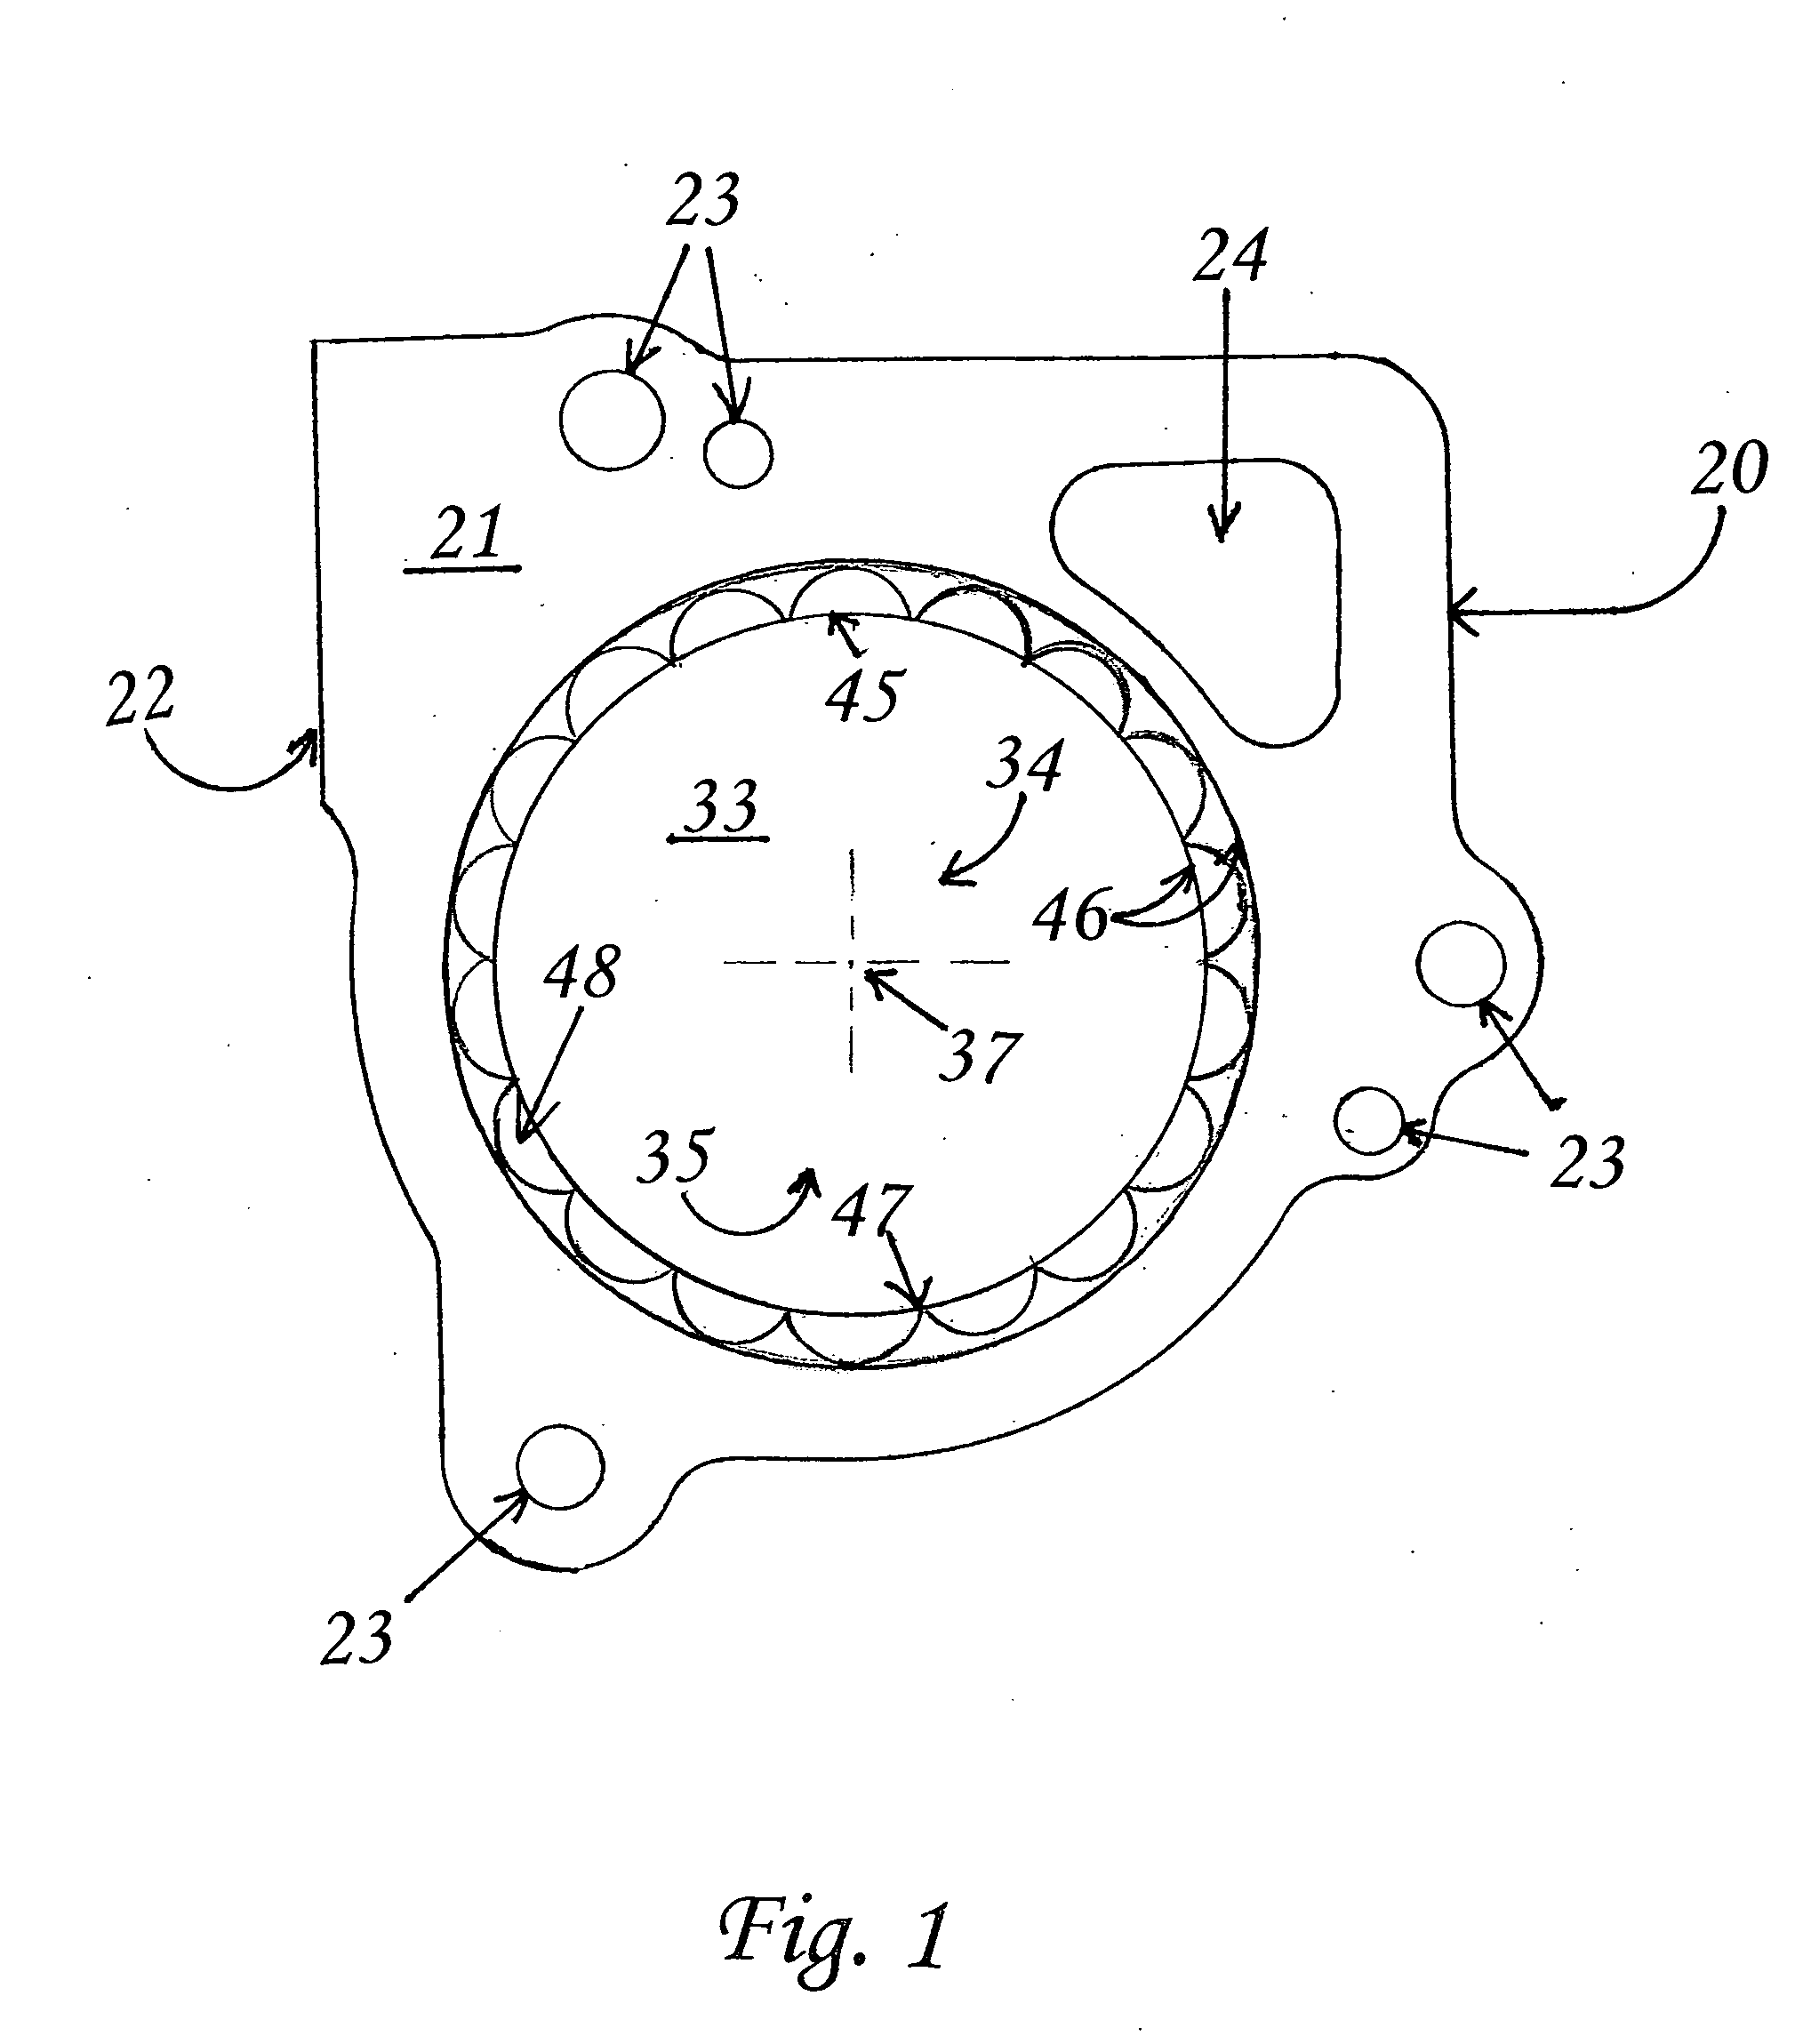 Spacer plate for use with internal combustion engines